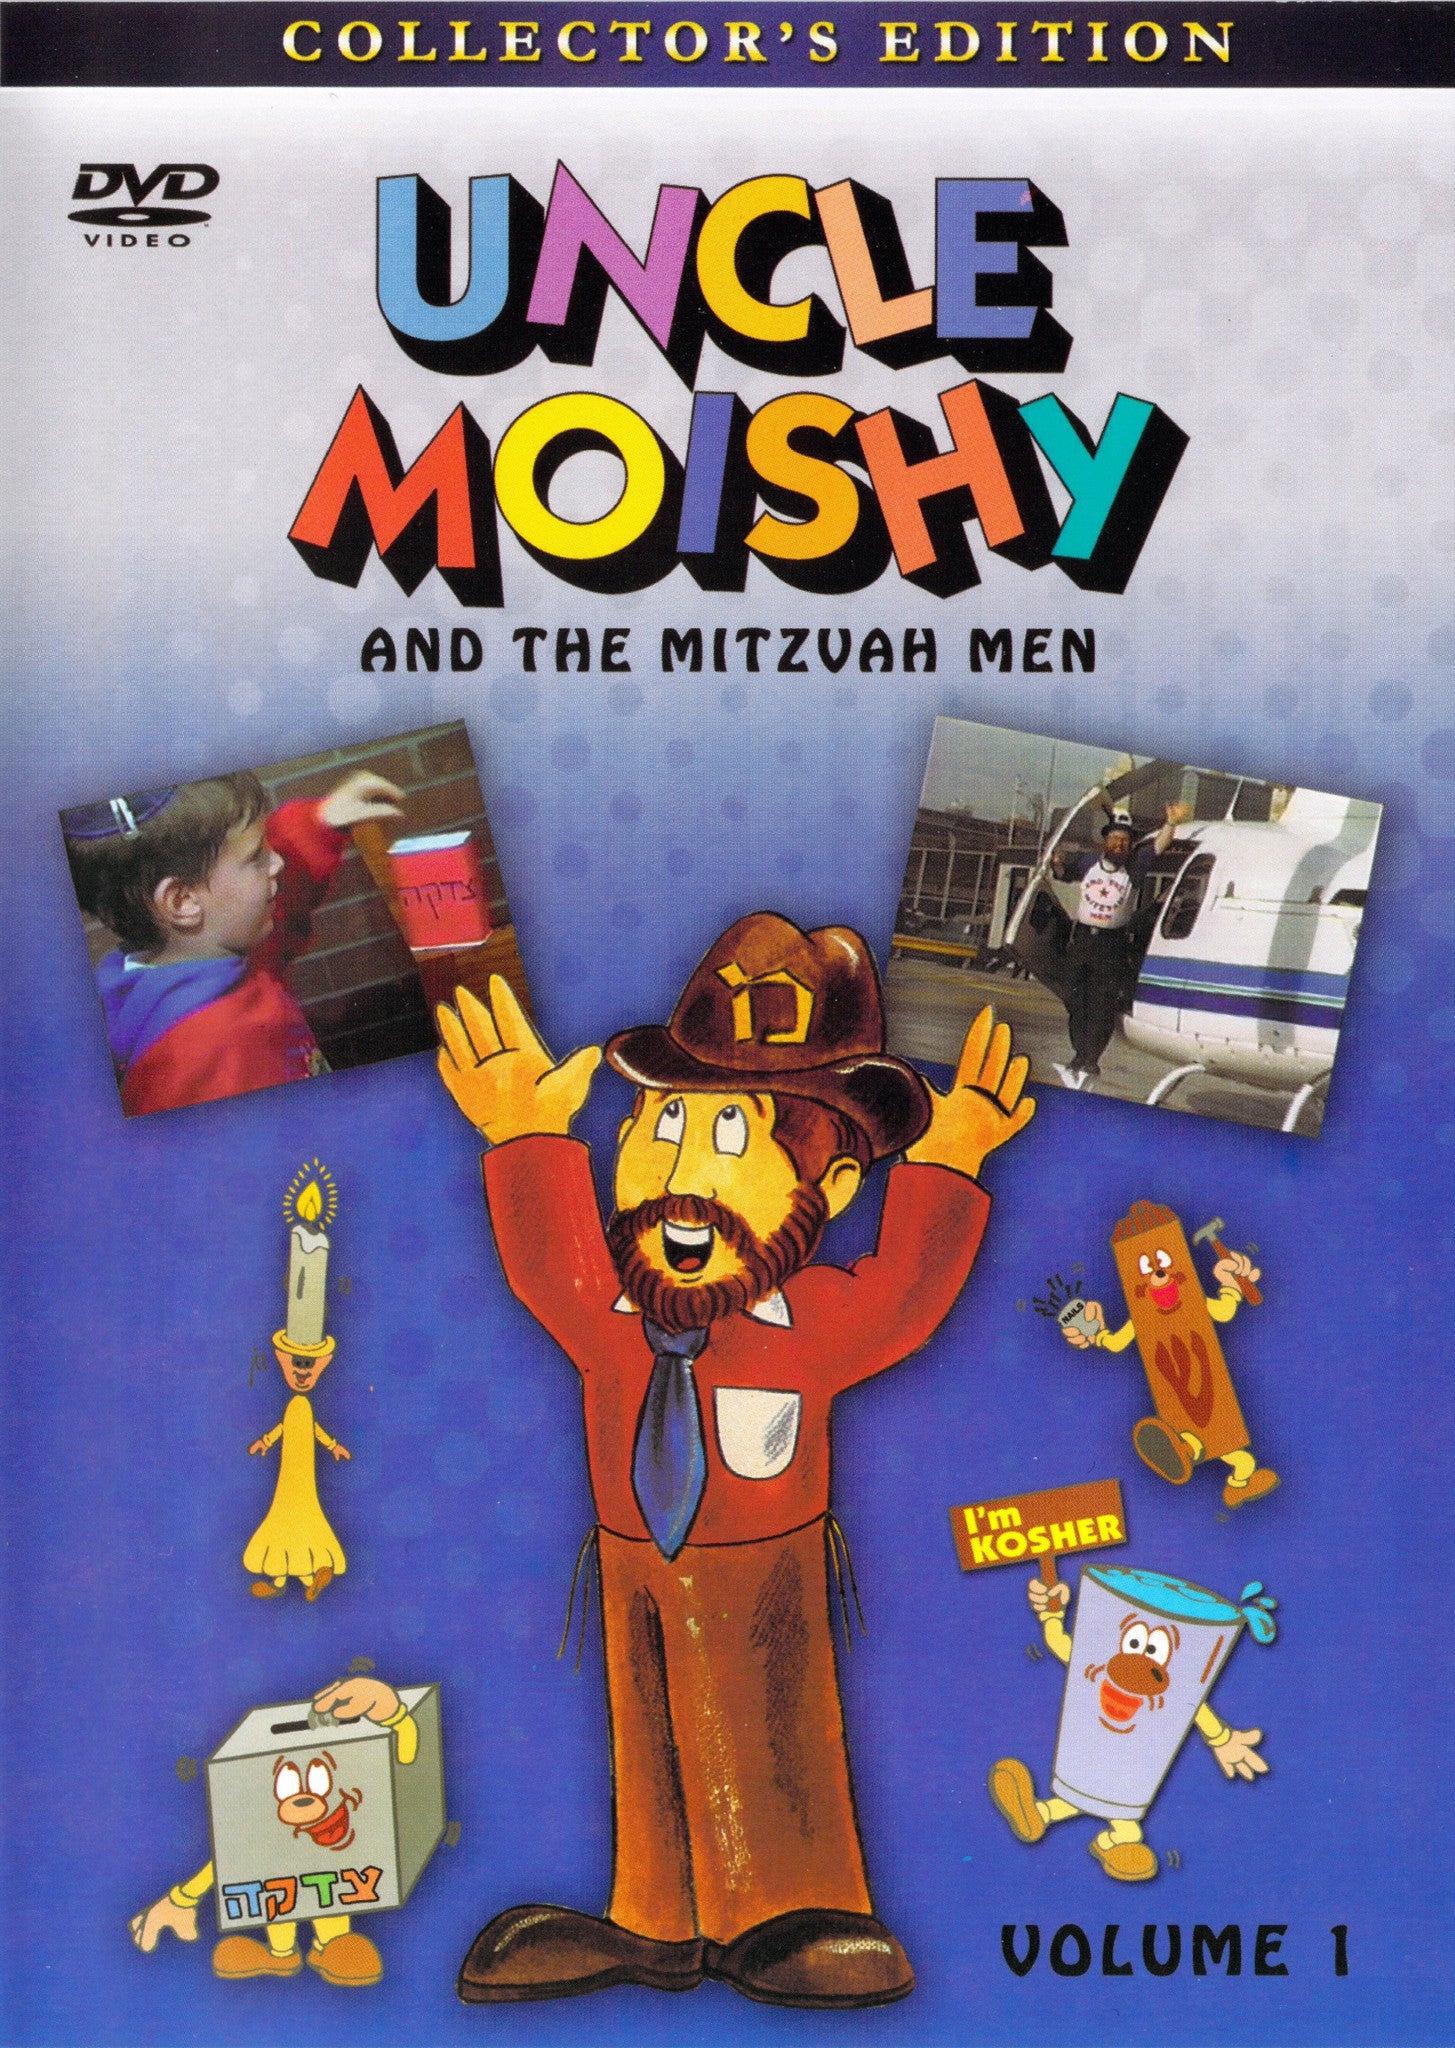 Uncle Moishy - Uncle Moishy DVD Volume 1